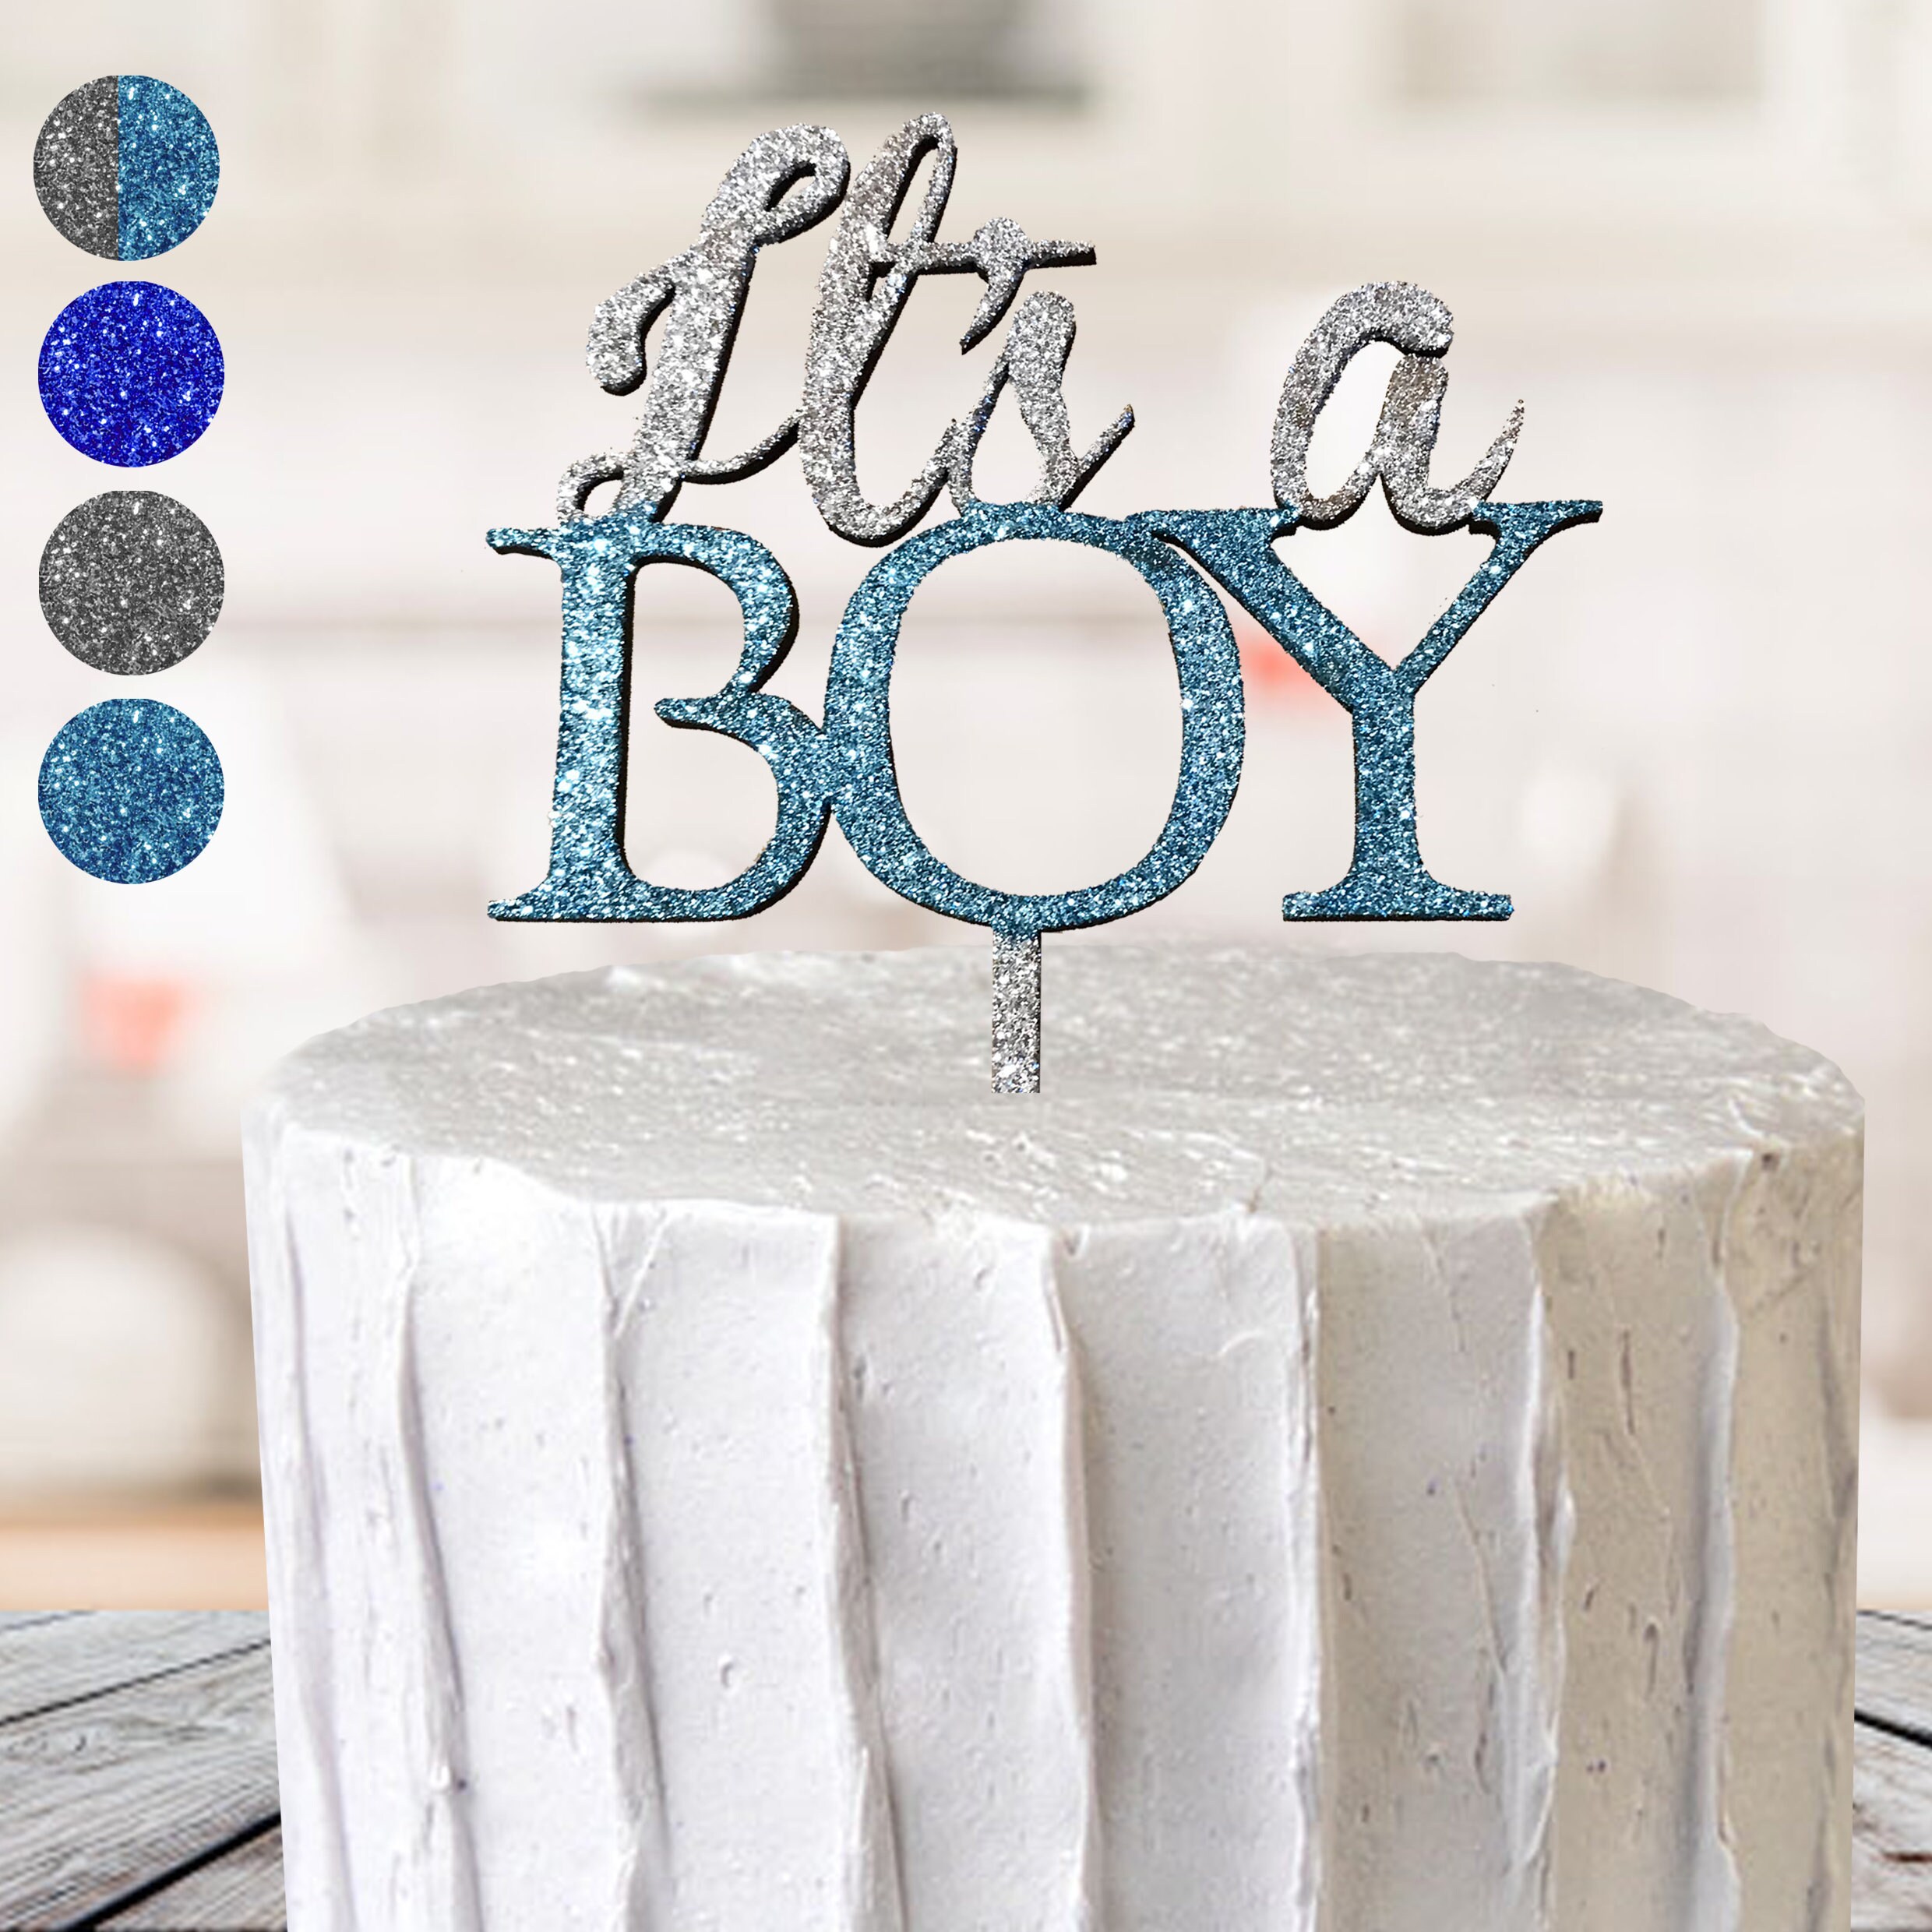 Topper cakes birthday parties Pretty decoration with customizable first name silverblue